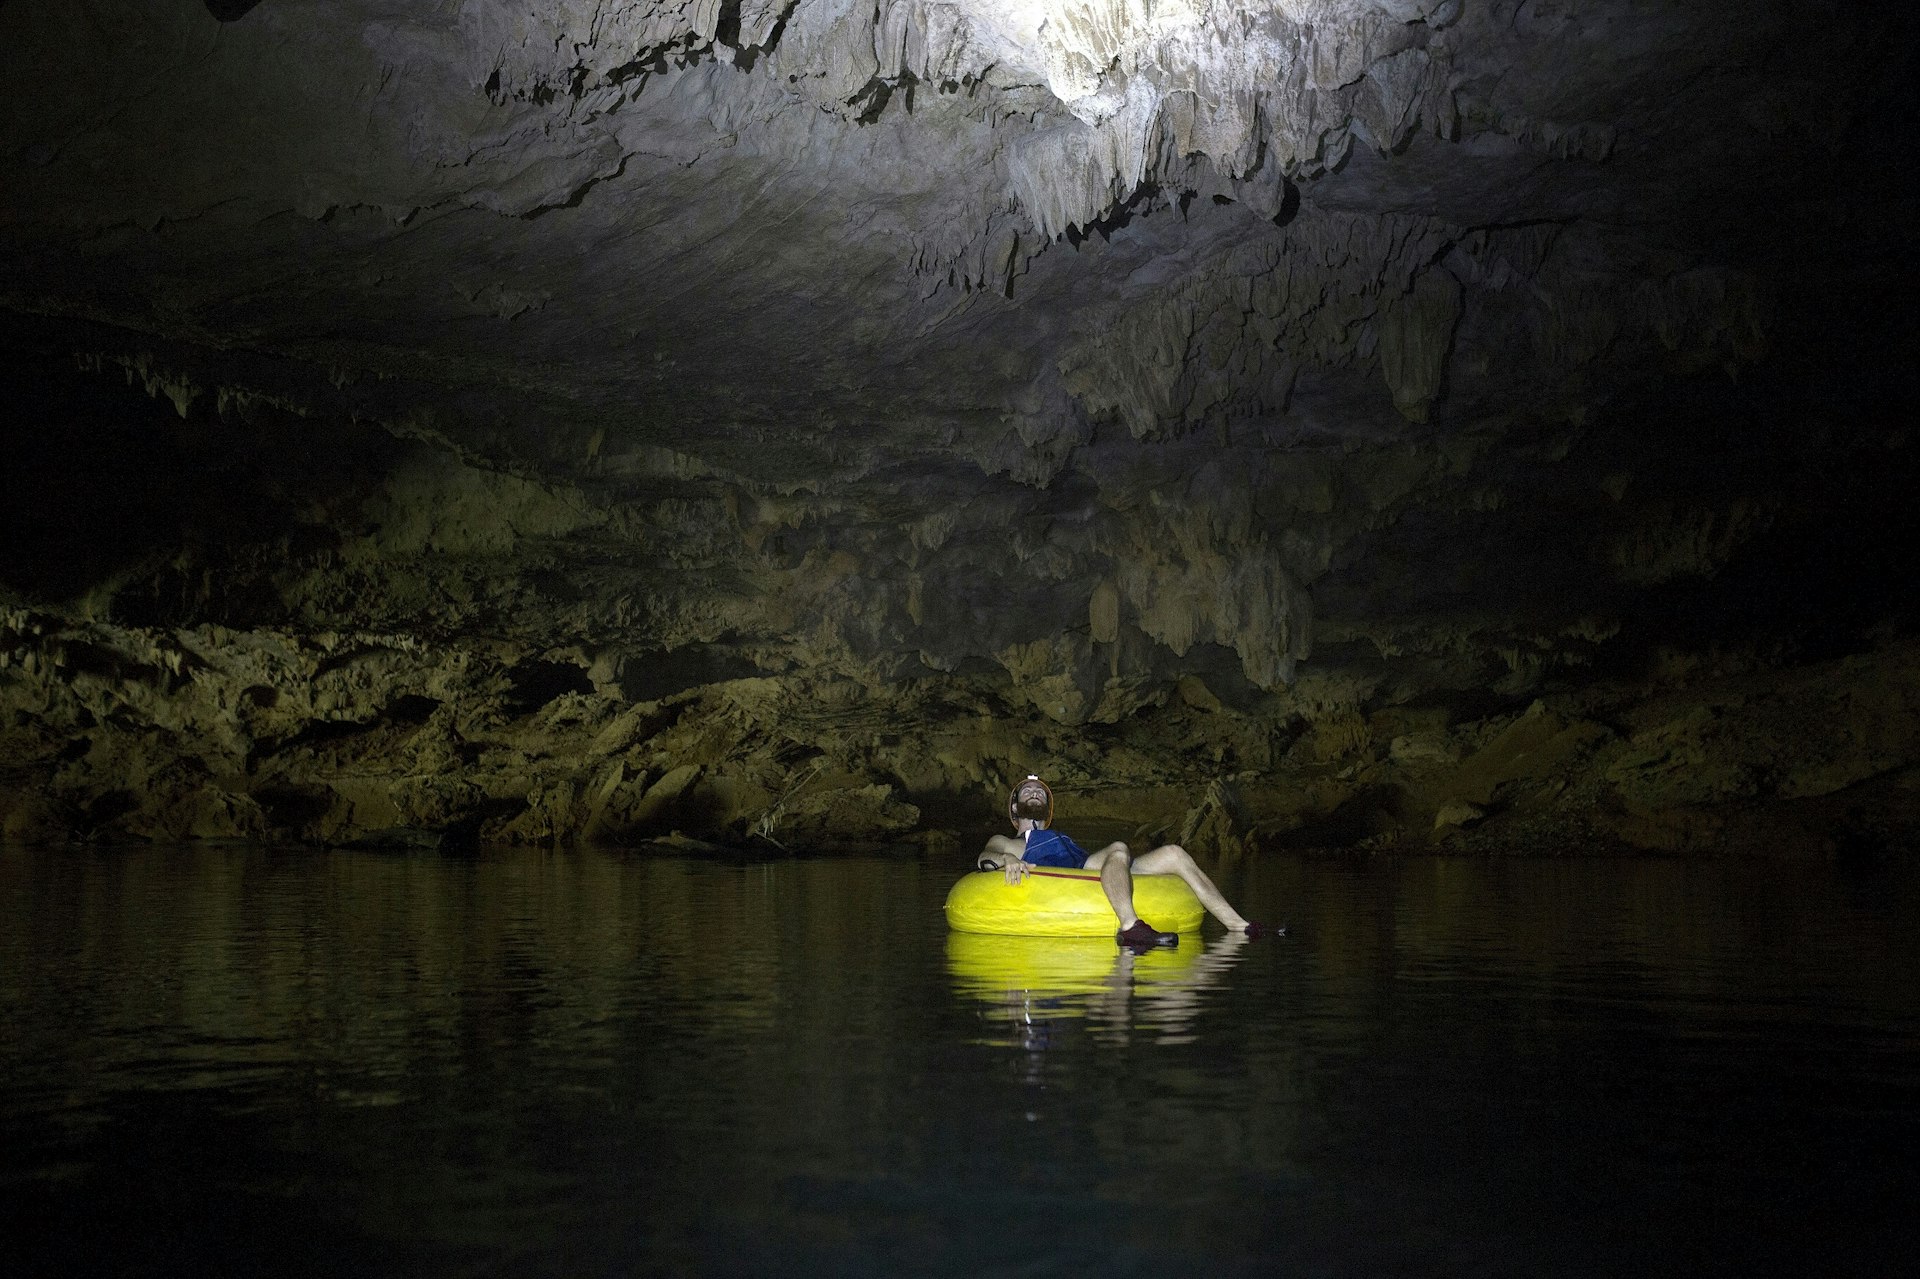 A lone person wearing a head torch sits in a yellow inflatable tube and floats through the waters in the darkness of a cave.